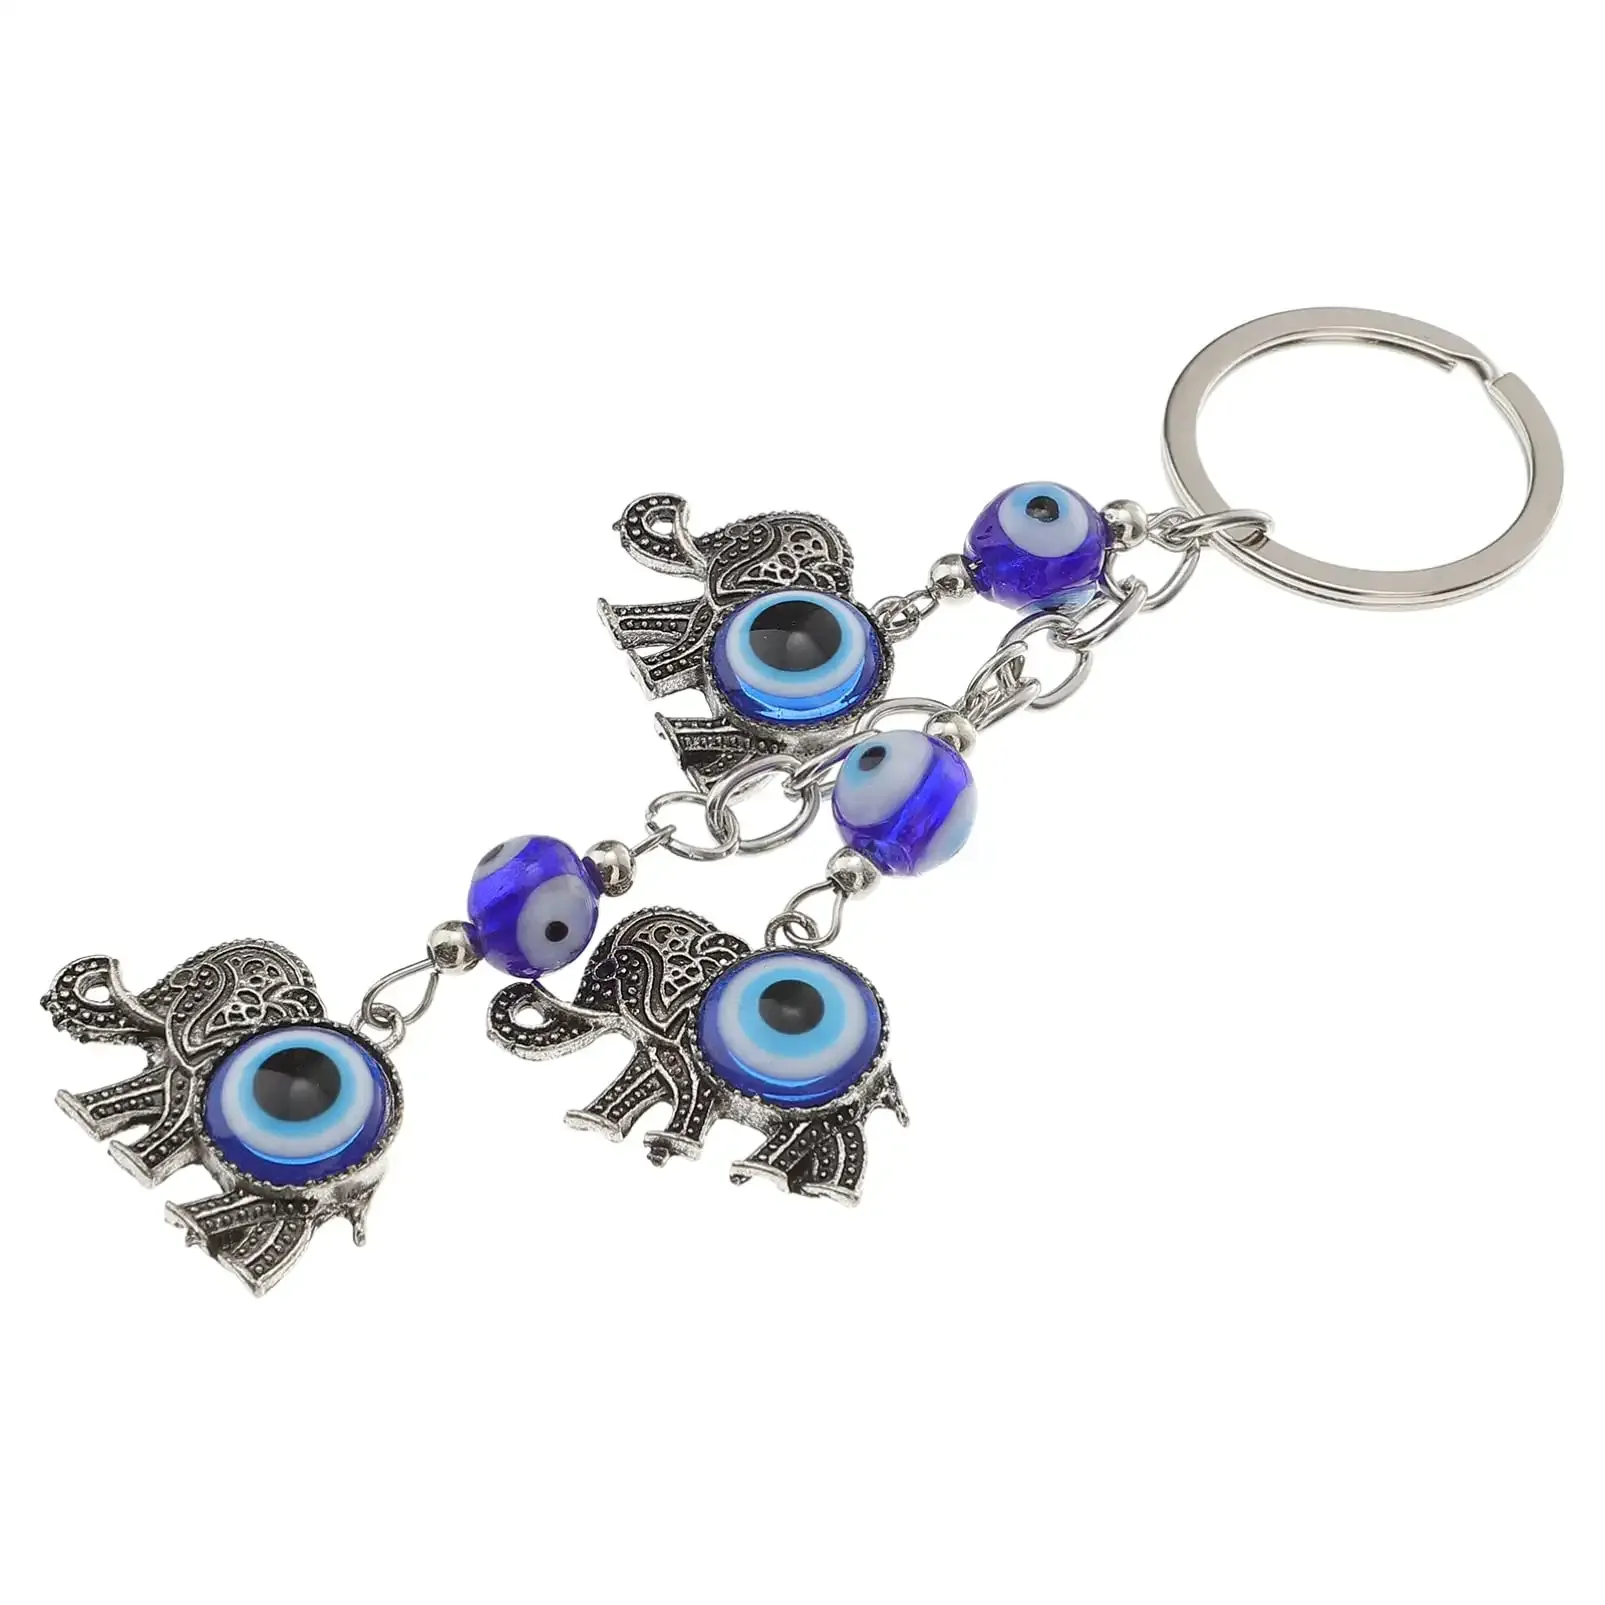 3ml bravo team lucky owl keychain ring w/evil eye tassel charm for wisdom sign of protection blessing home keys purse bags decorative things accessories car ornaments for rear view mirror